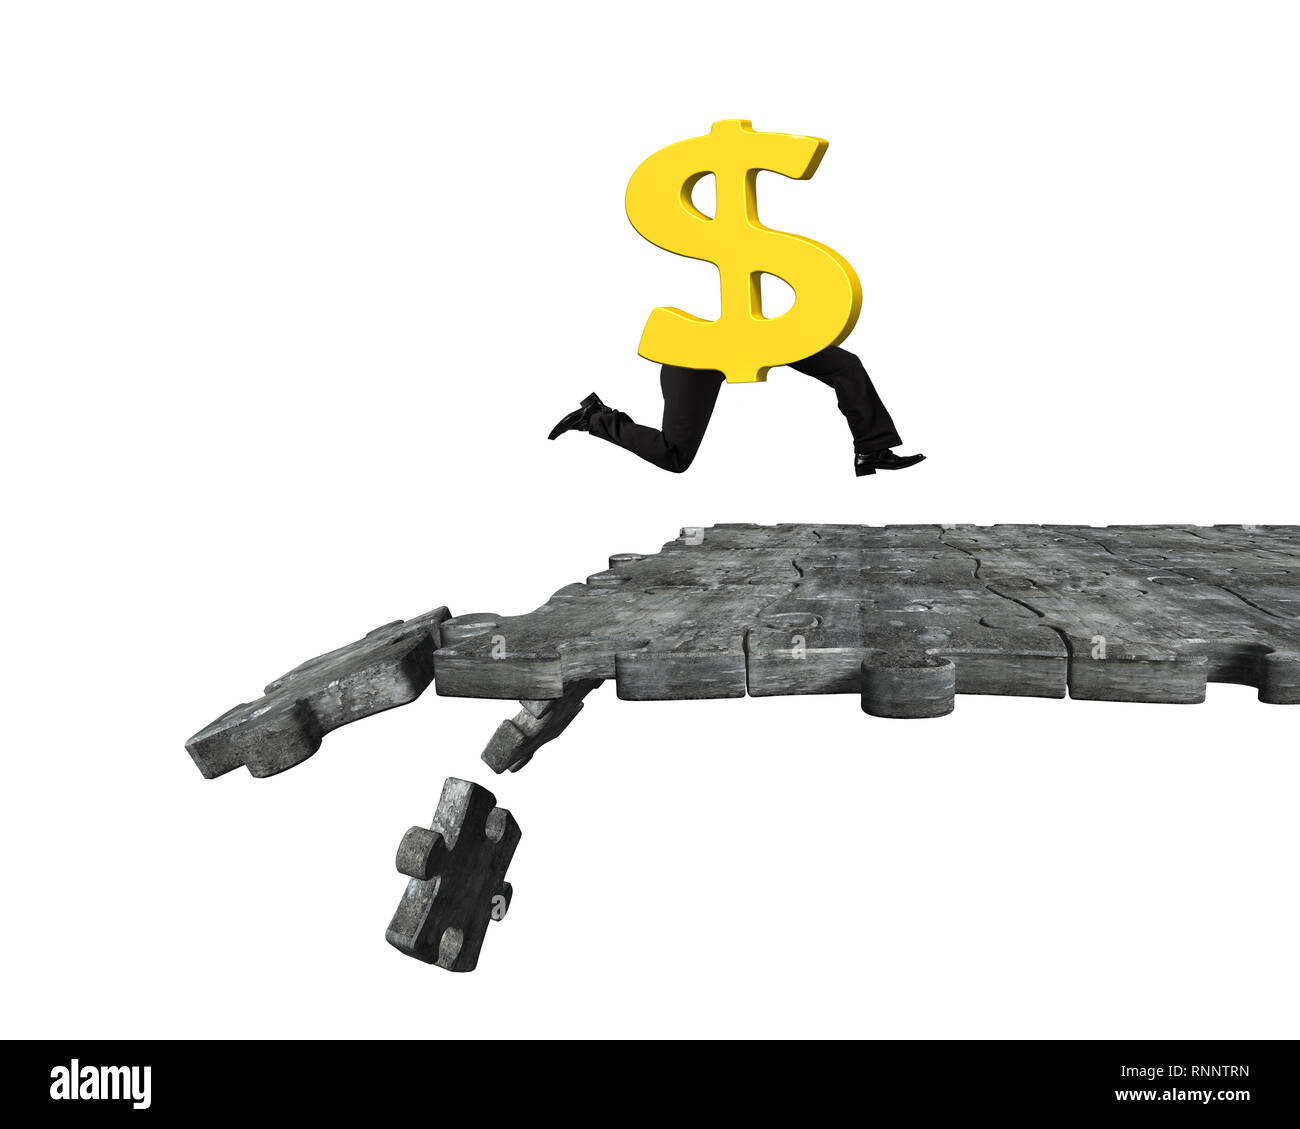 Dollar sign with human legs running on concrete puzzle ground with some pieces falling, isolated on white background. Stock Photo